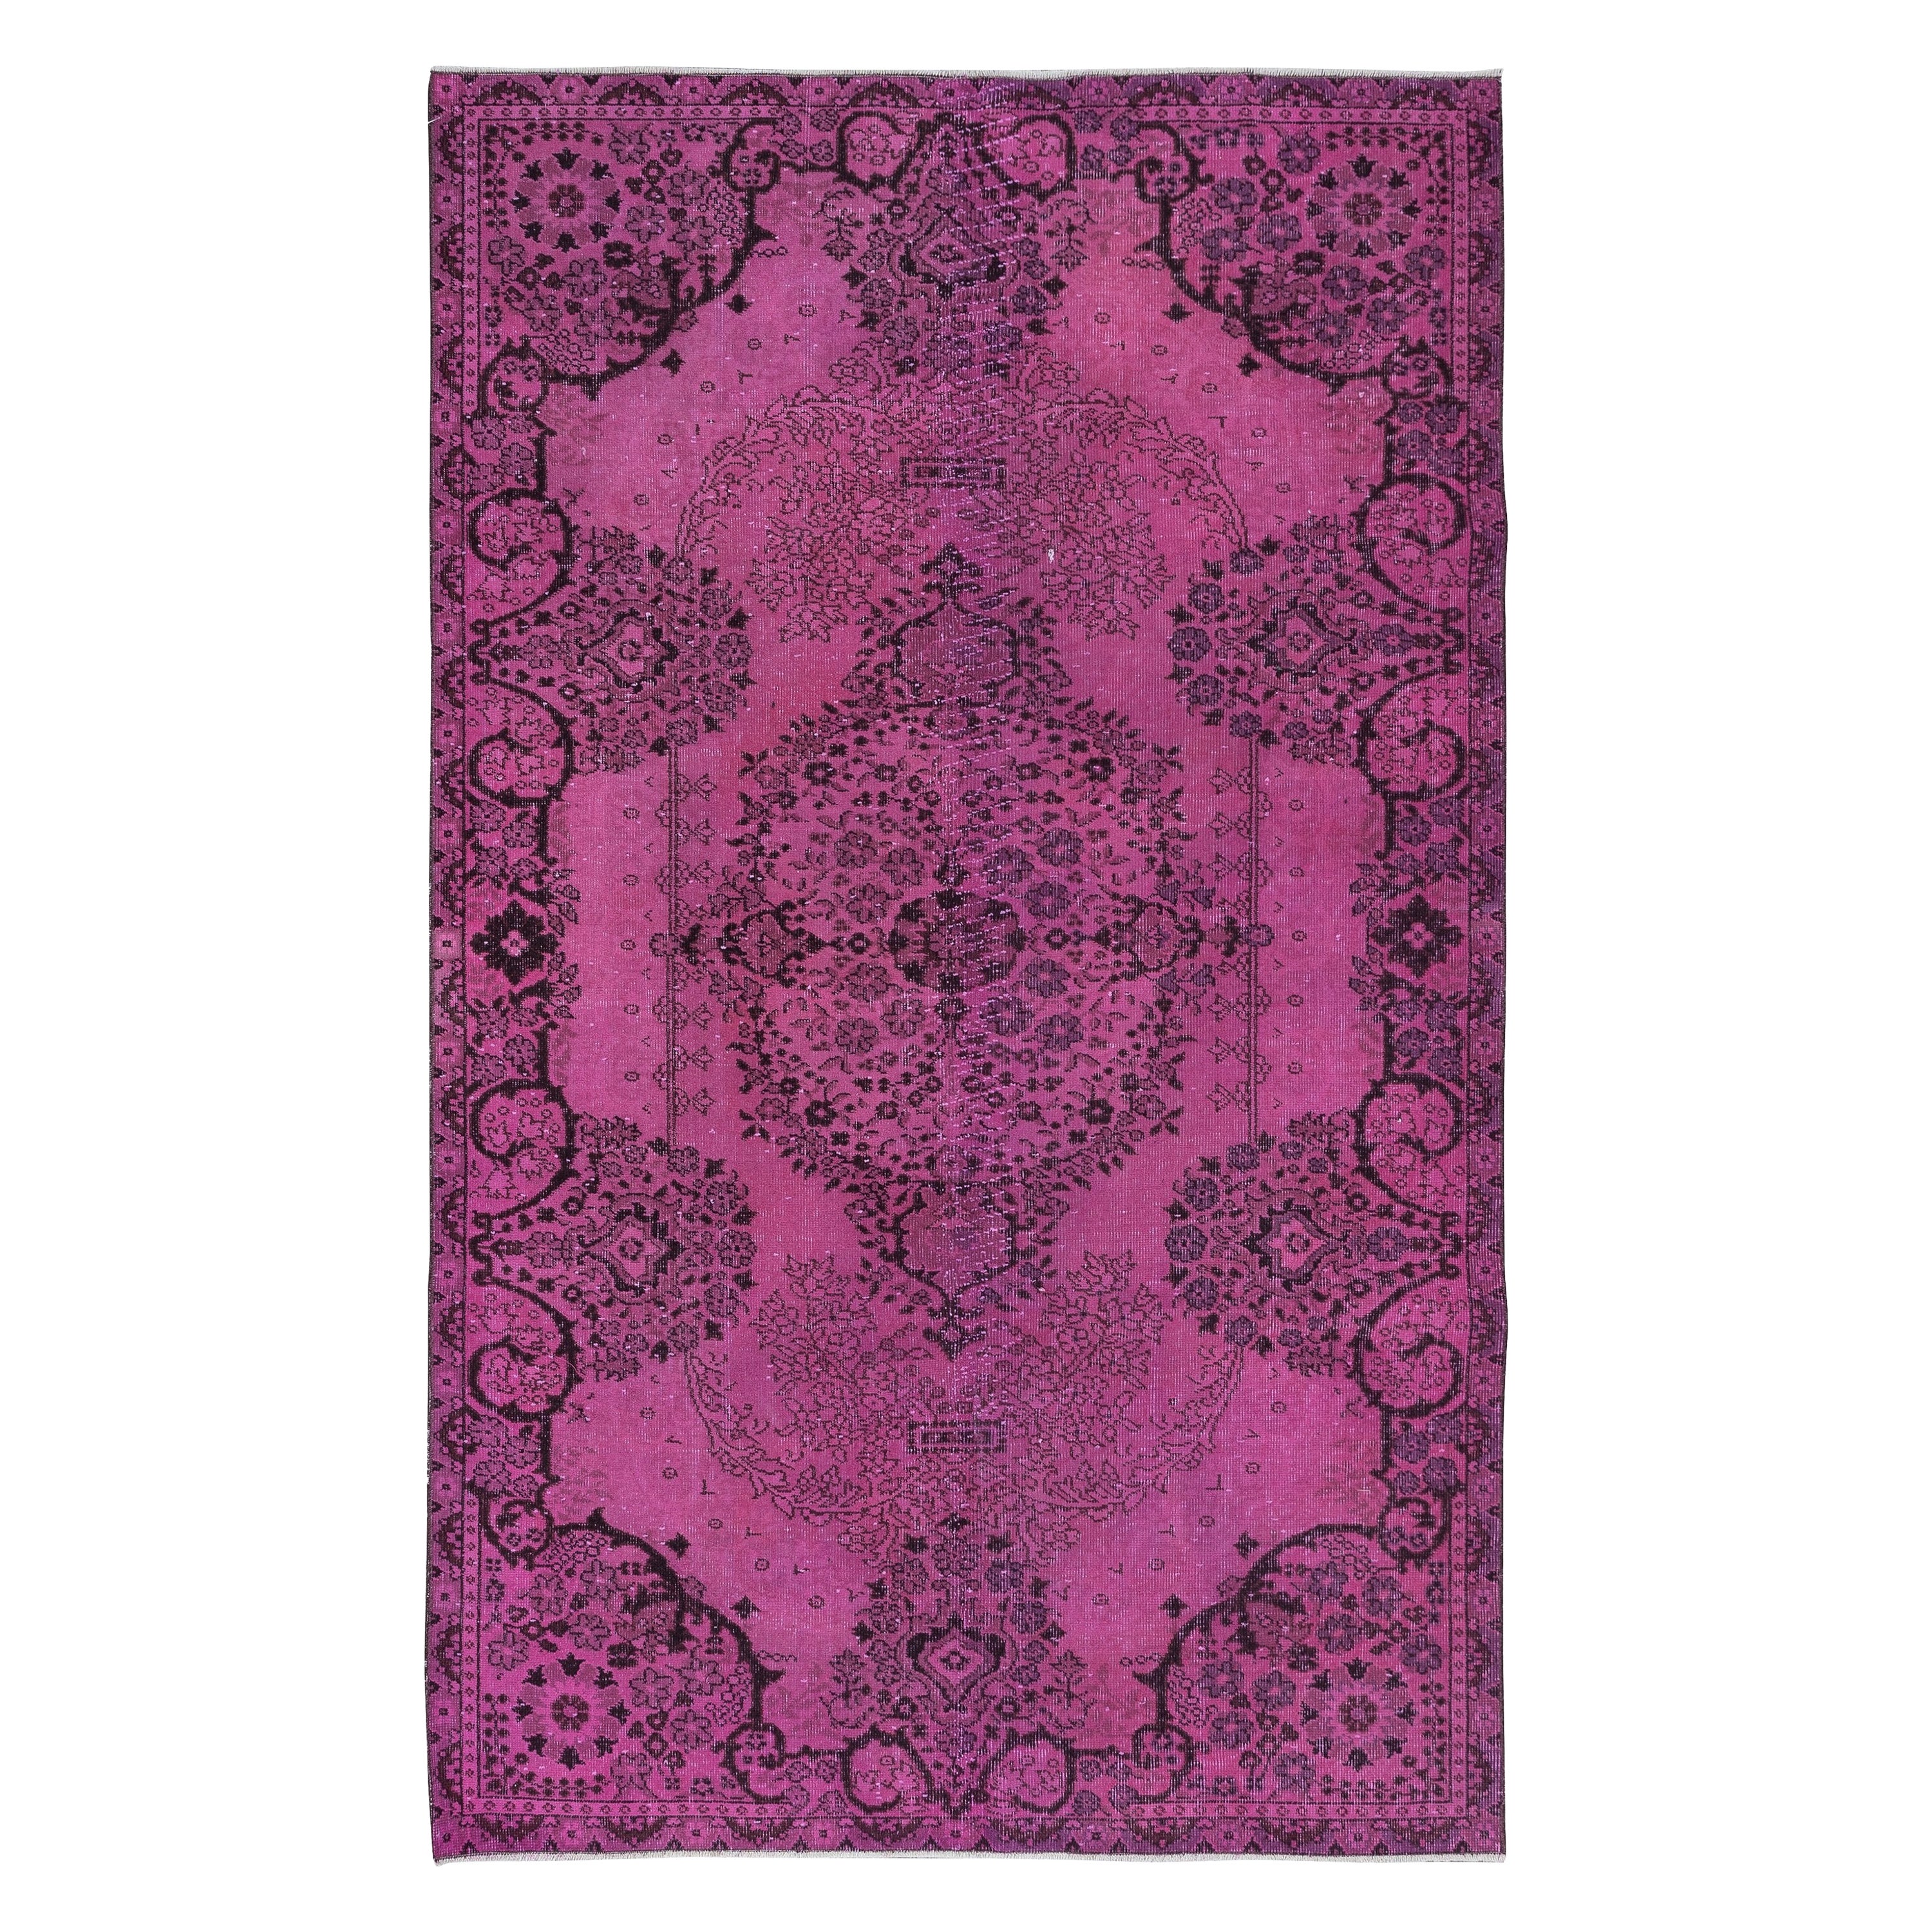 5.3x8.5 Ft Decorative Pink Area Rug for Modern Interiors, Handknotted in Turkey For Sale